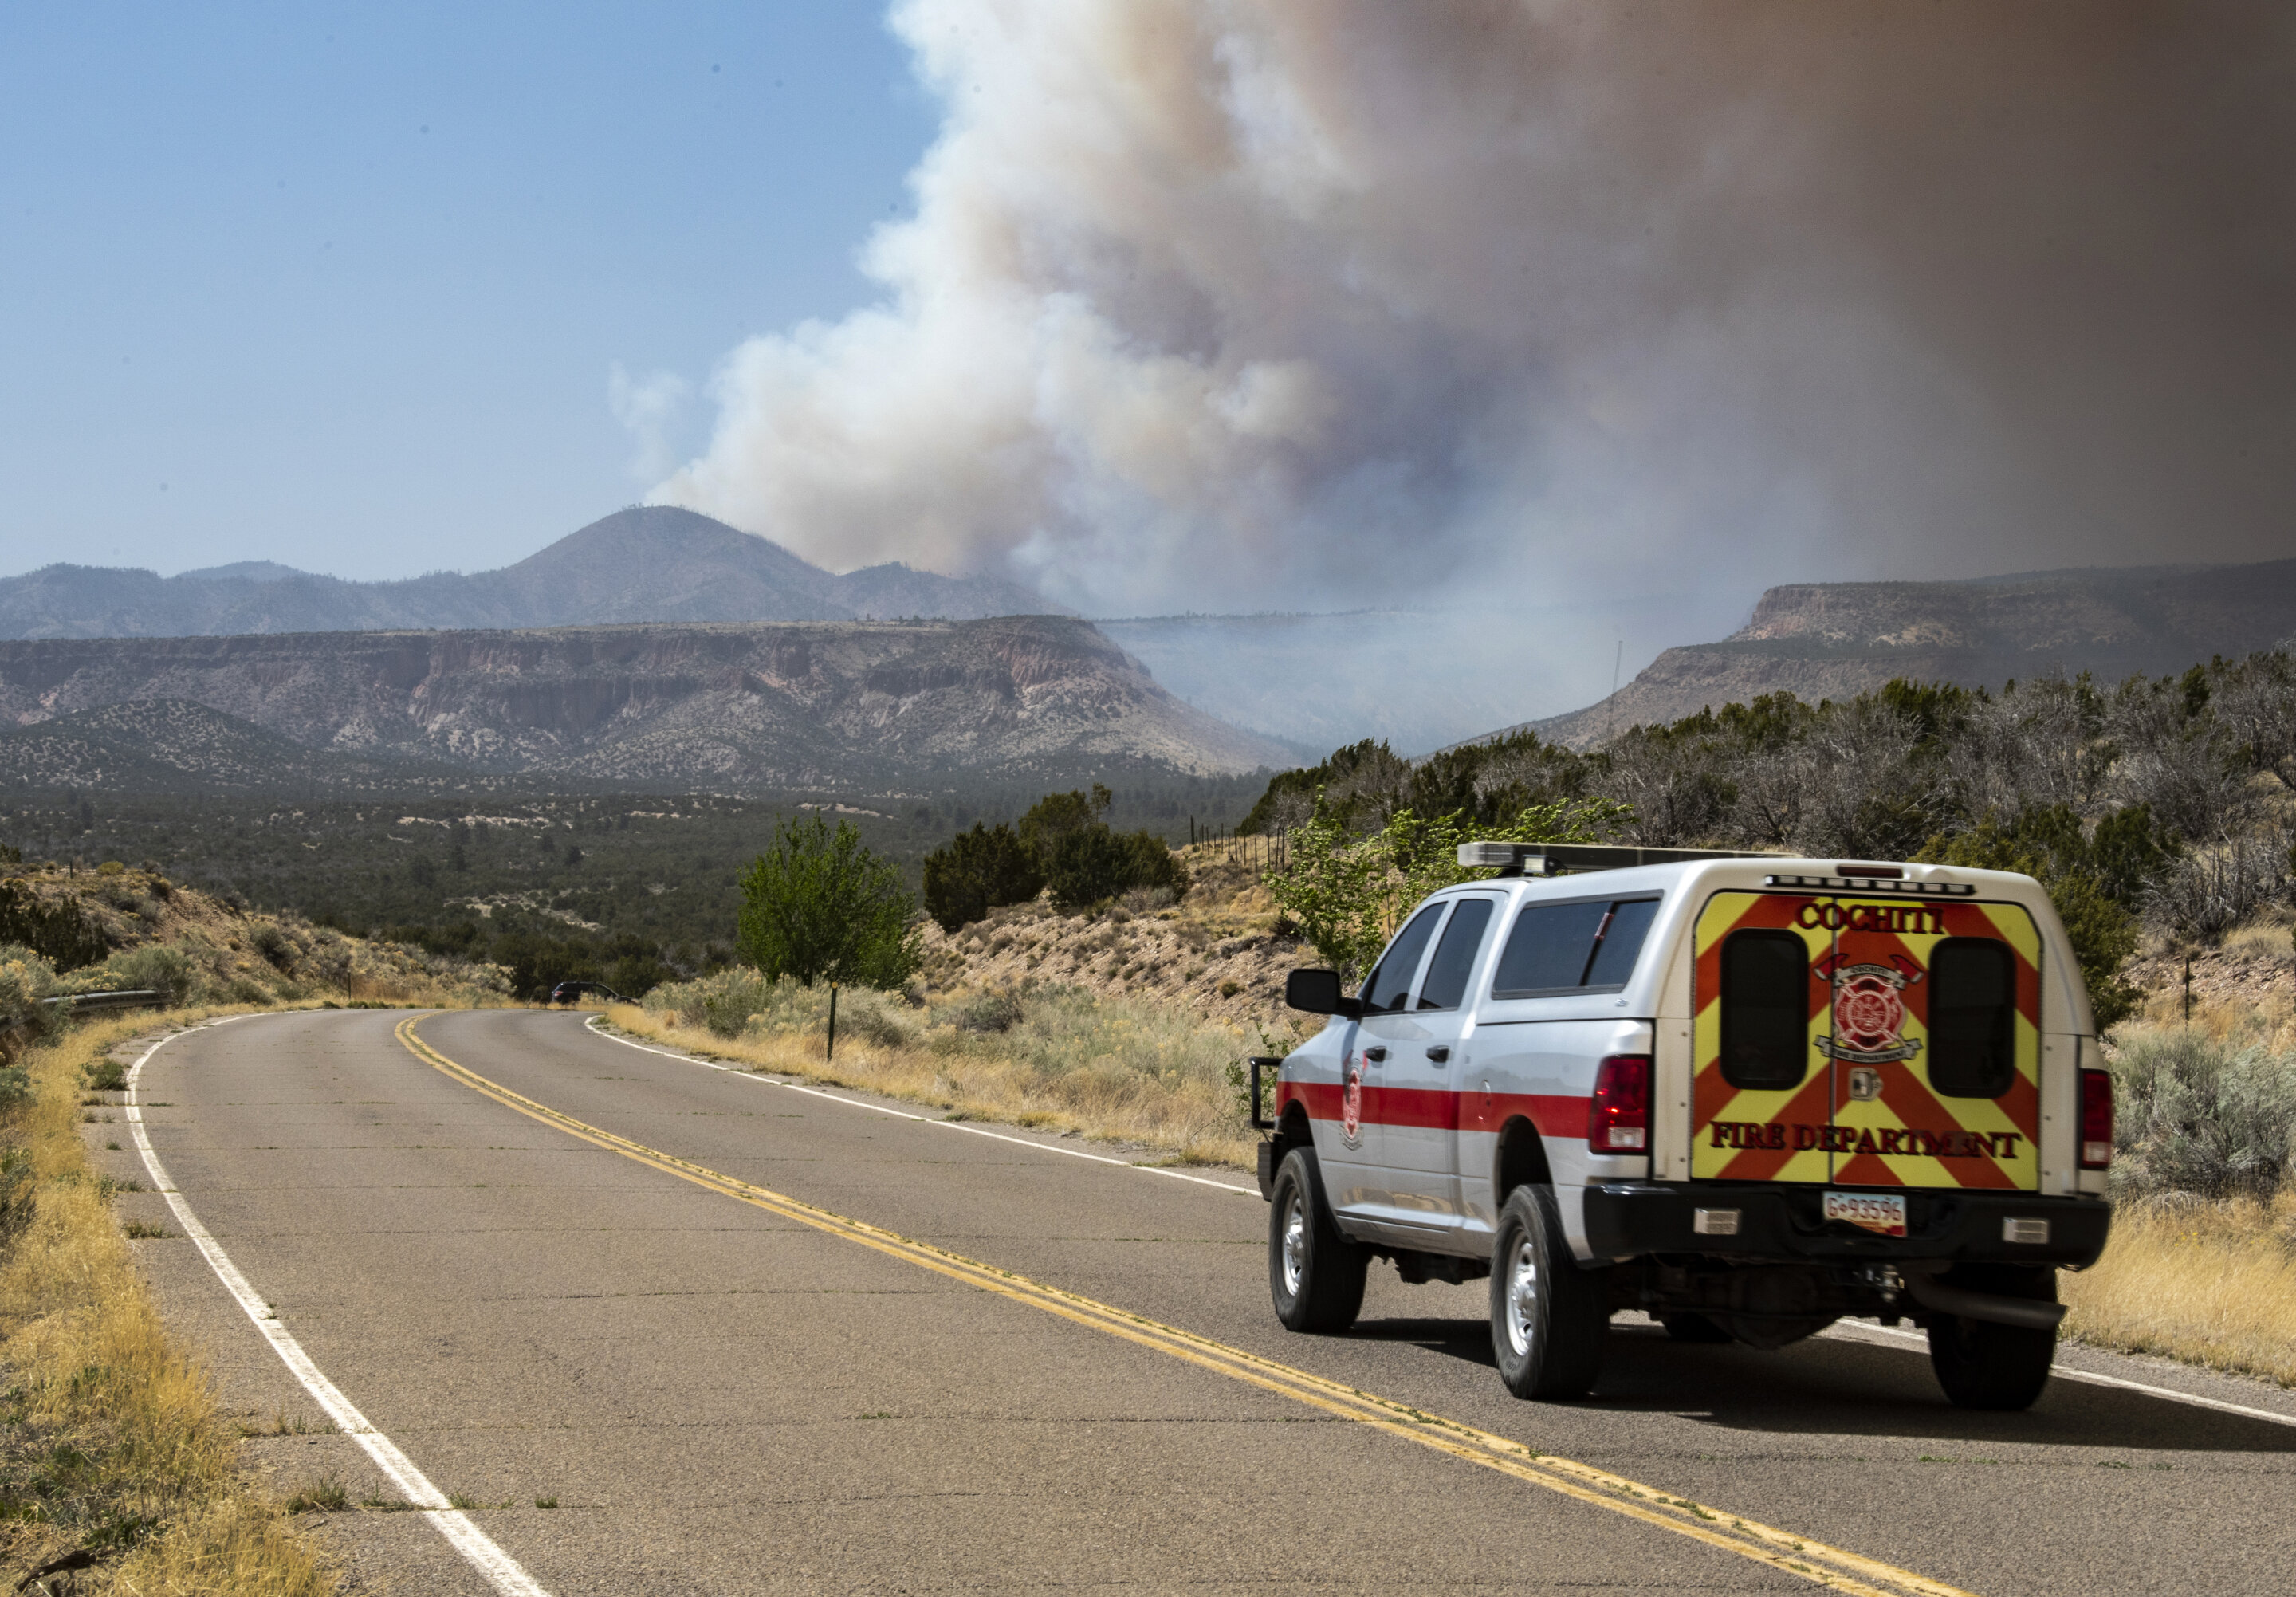 #More evacuations expected near dangerous Southwest wildfires